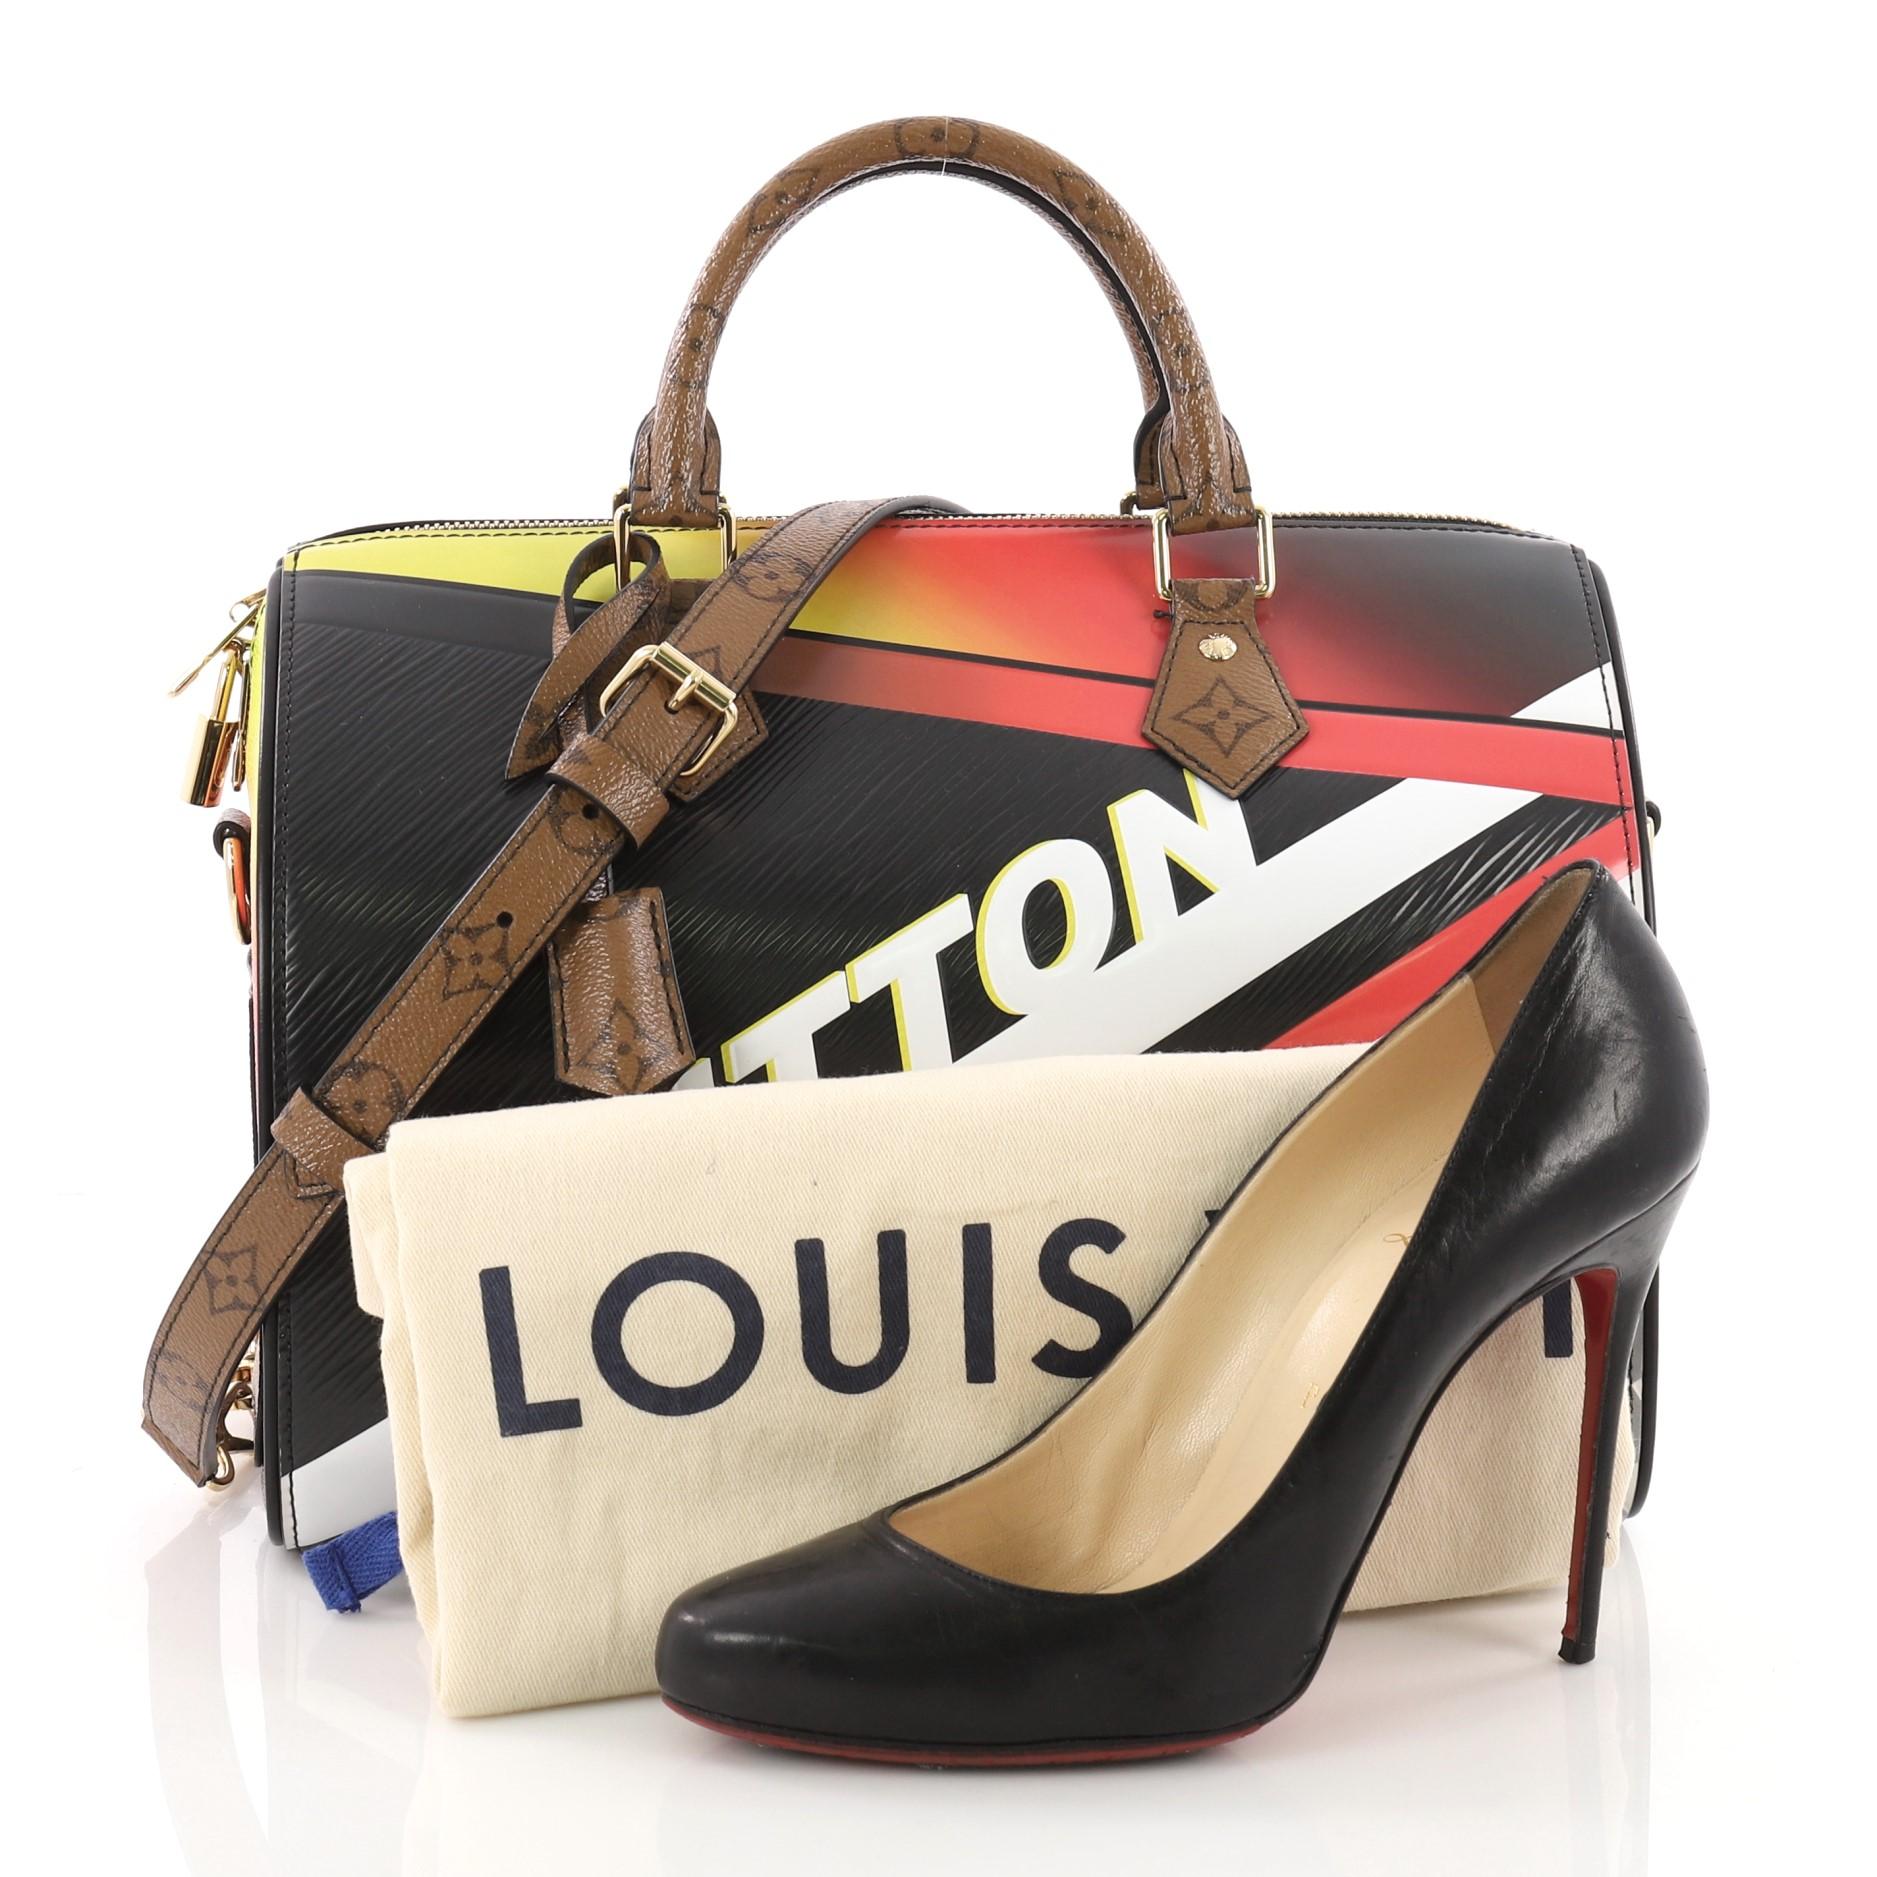 This authentic Louis Vuitton Speedy Bandouliere Bag Limited Edition Race Epi Leather 30 from Cruise 2017 collection is a versatile accessory. Crafted from multicolor epi with a race car motif, this Speedy features dual-rolled reverse monogram coated